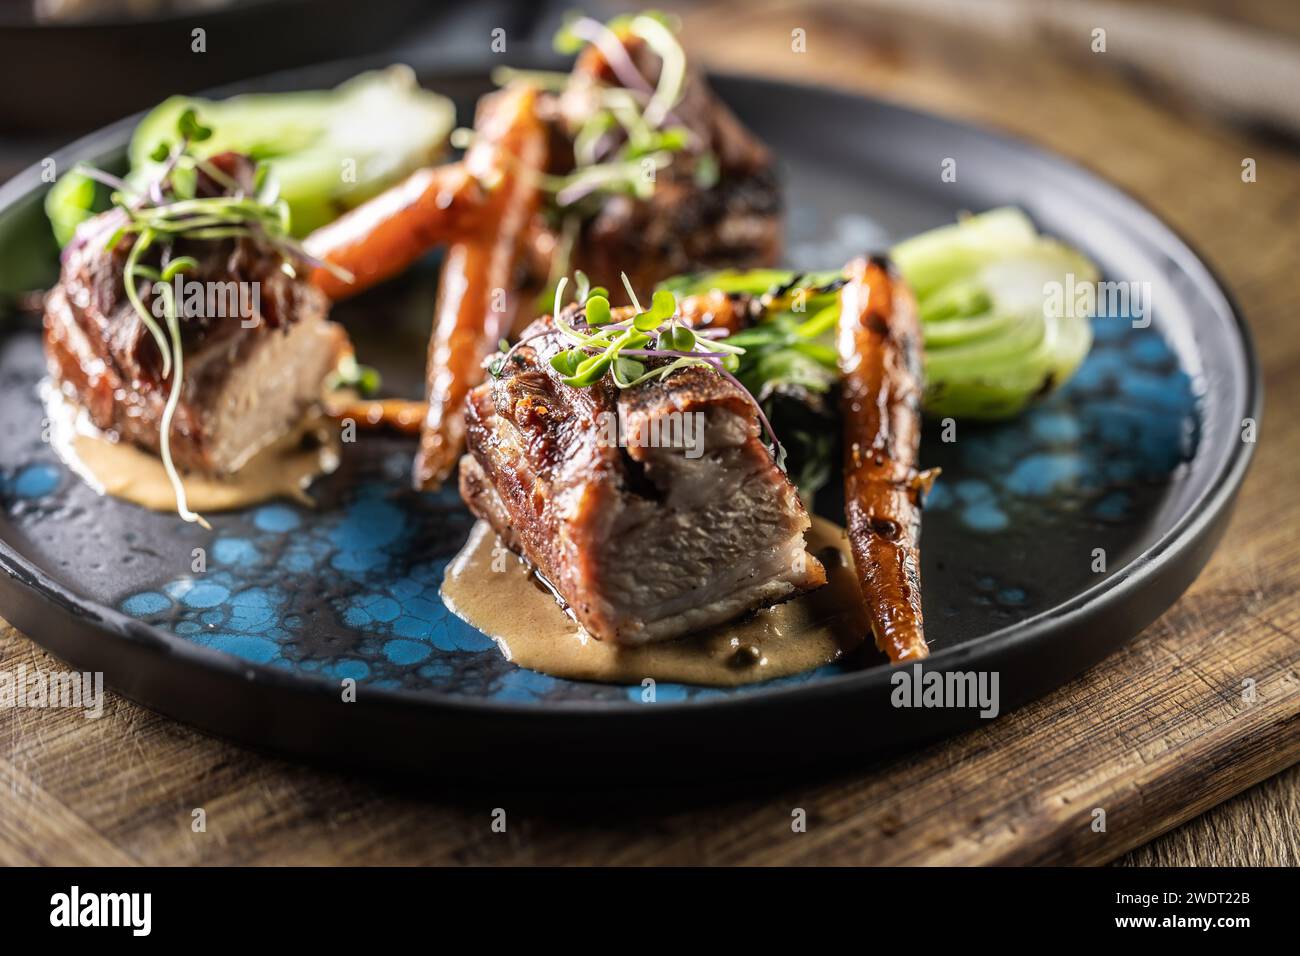 Three pieces of baked belly with grilled vegetables on a plate in a pub or restaurant. Stock Photo